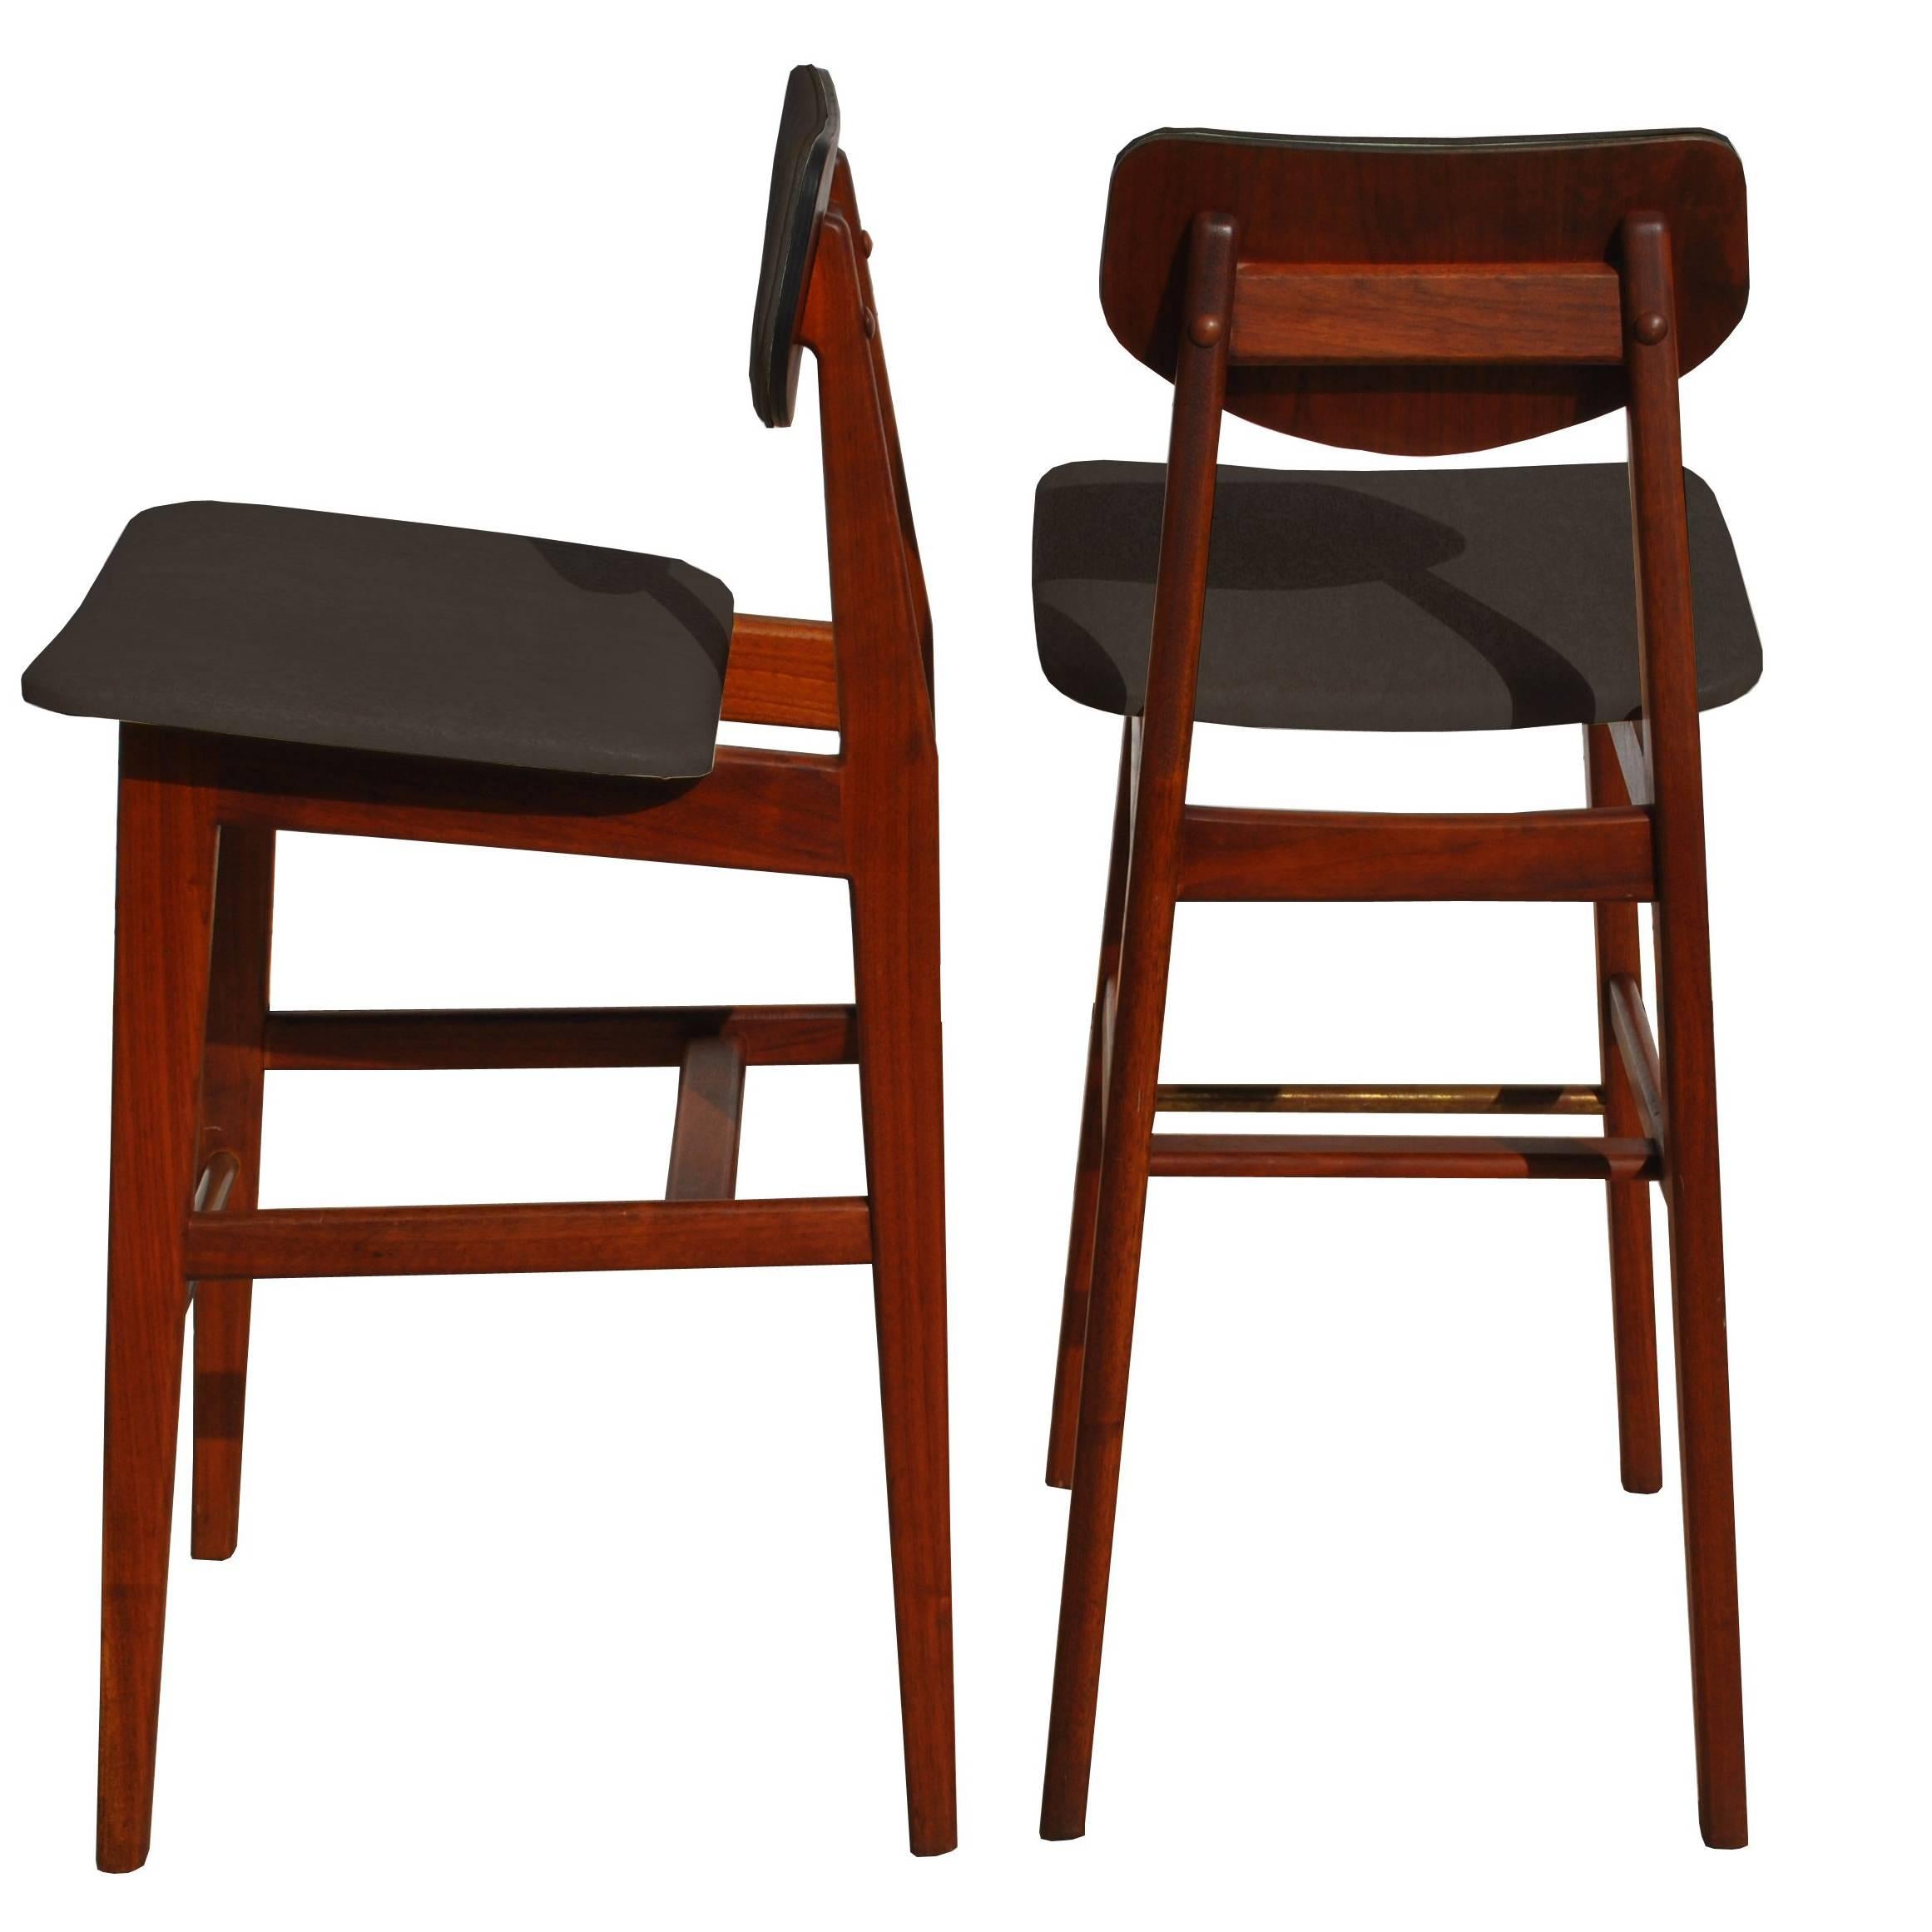 Pair of Rare Jens Risom Stools in Leather